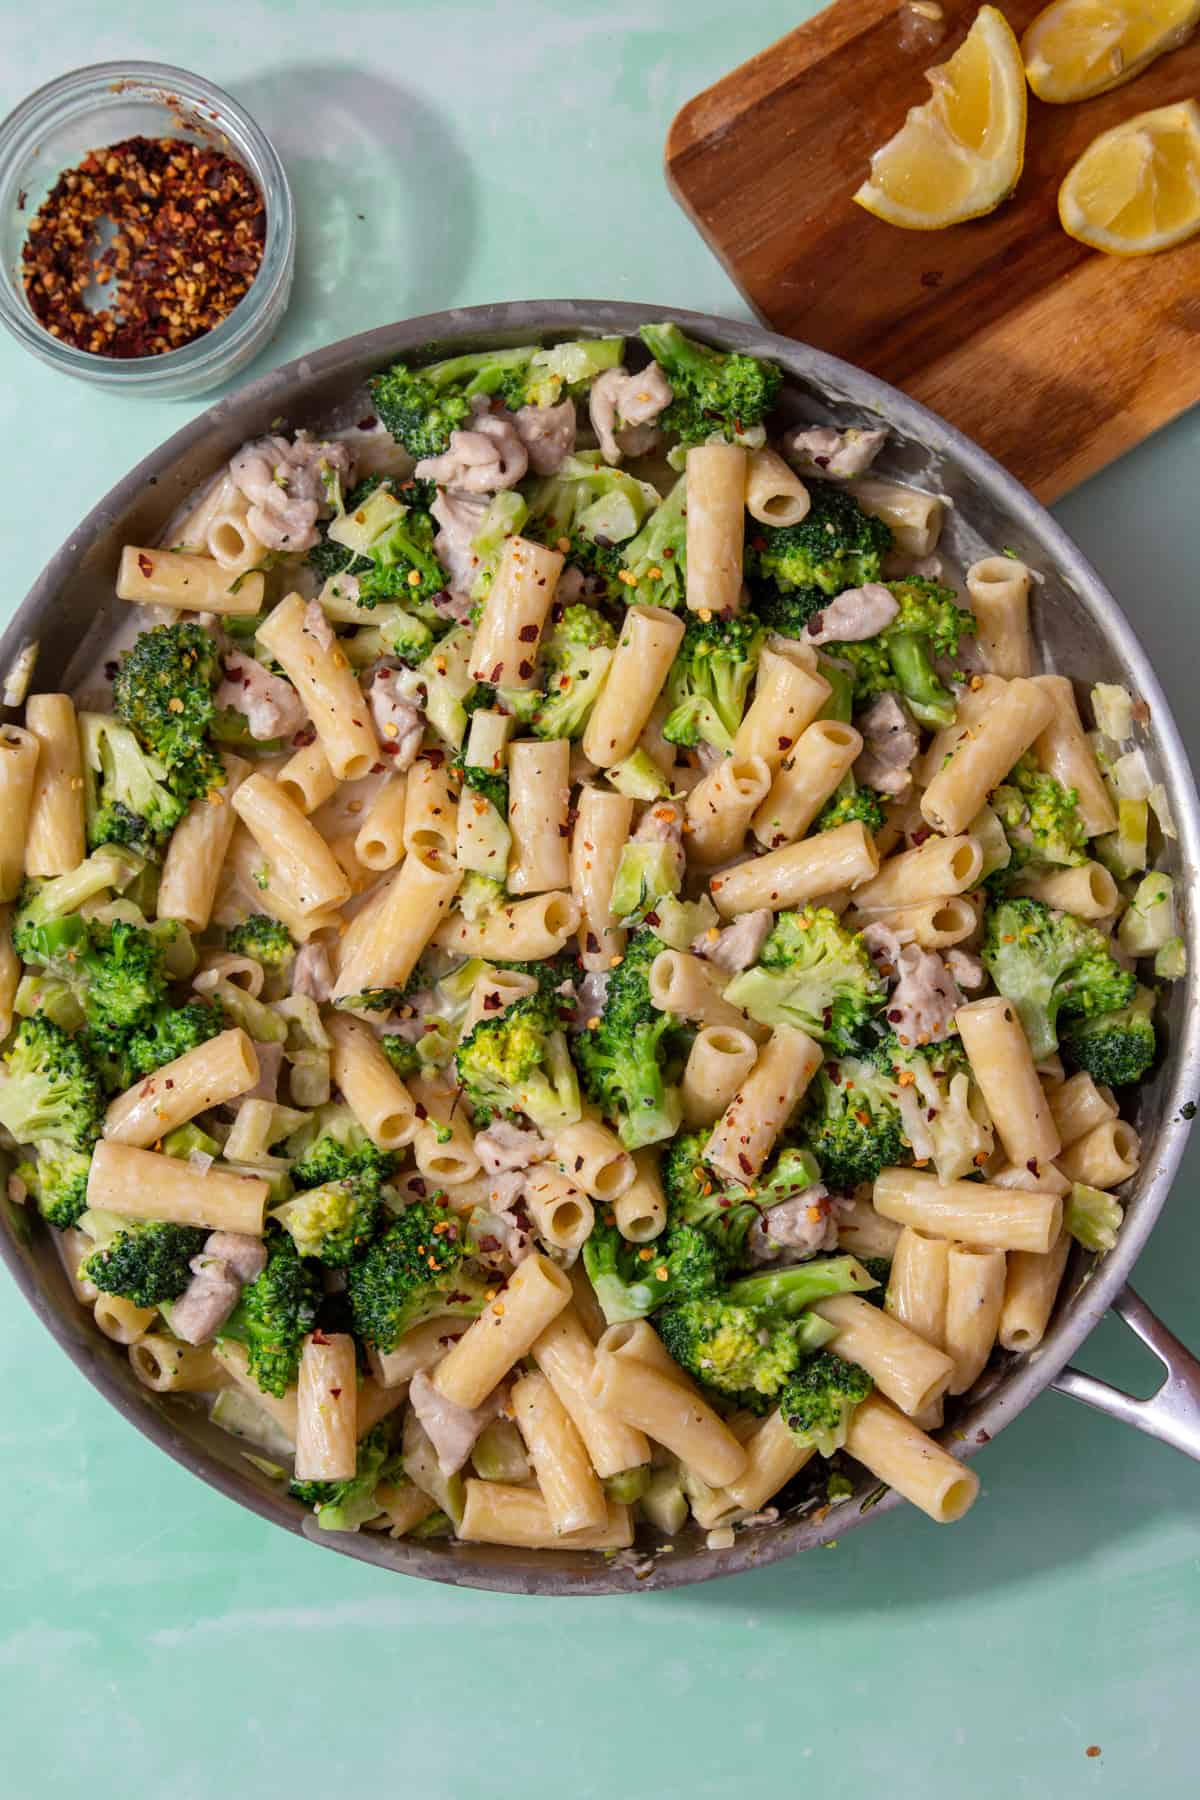 A large pan with broccoli, rigatoni pasta and chicken pieces with lemon wedges on a chopping board and chilli flakes in a pot in partial veiw behind the pan.